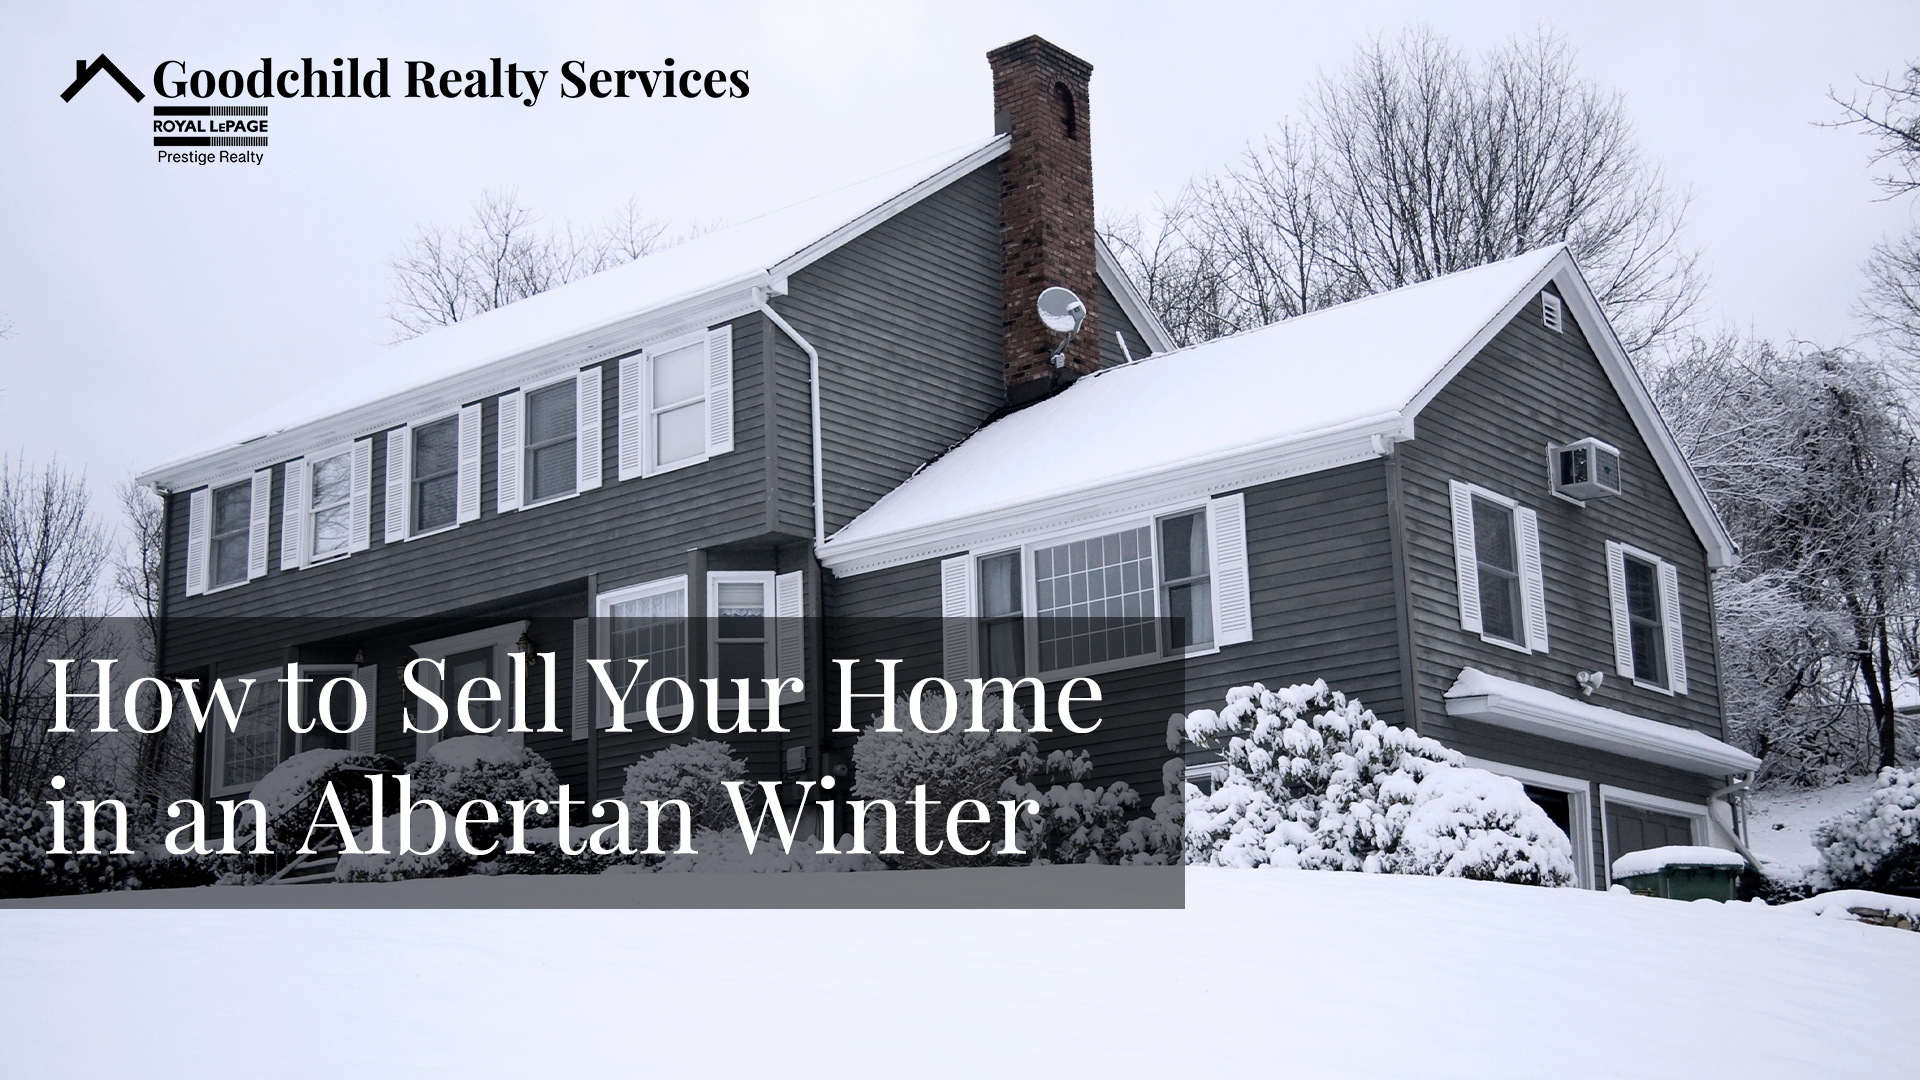 How to Sell Your Home in an Albertan Winter